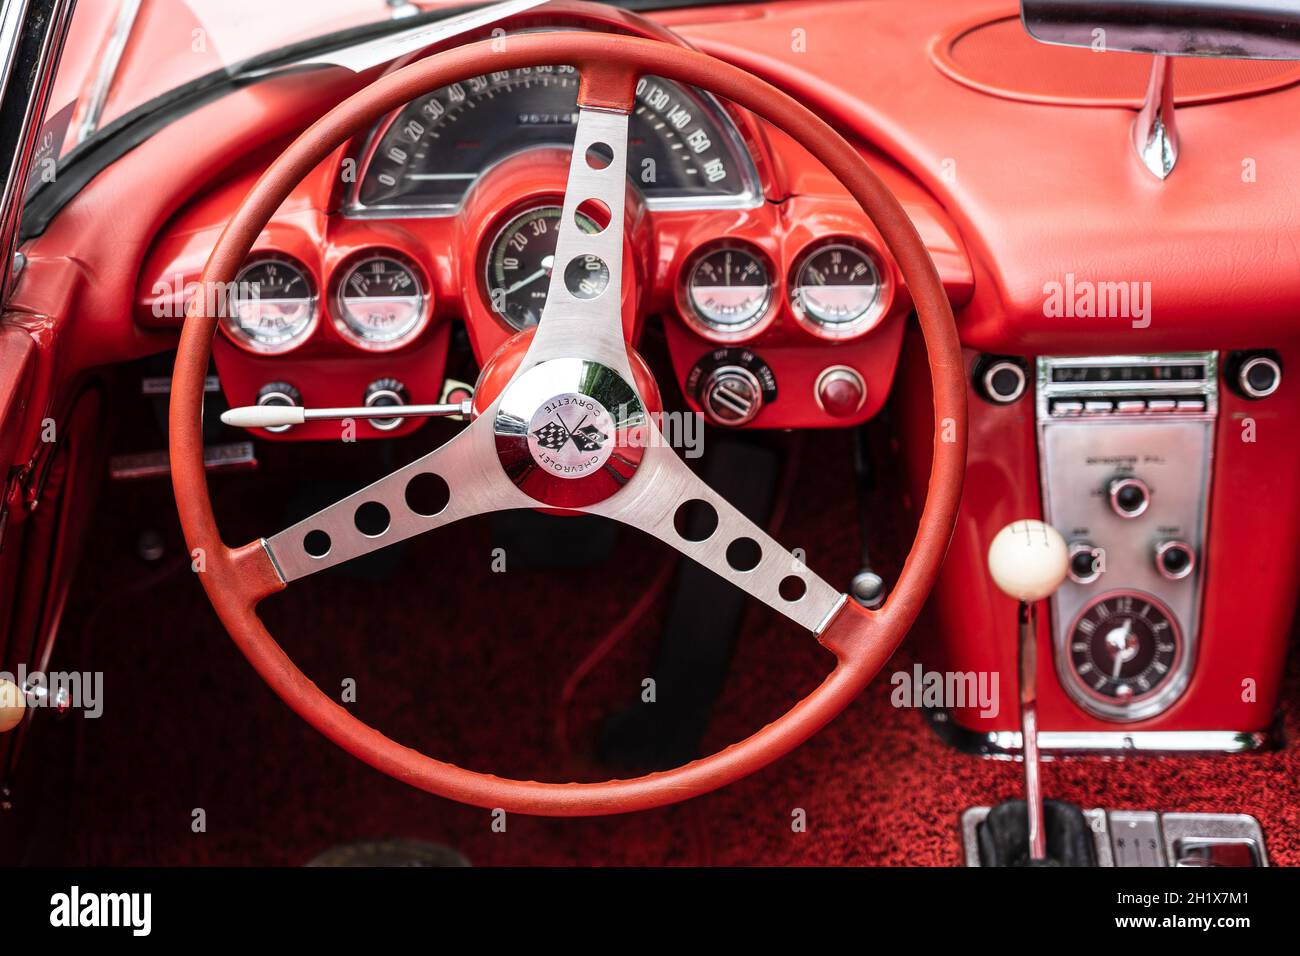 DIEDERSDORF, GERMANY - AUGUST 21, 2021: The interior of sports car Chevrolet Corvette (C1), 1960. The exhibition of 'US Car Classics'. Stock Photo